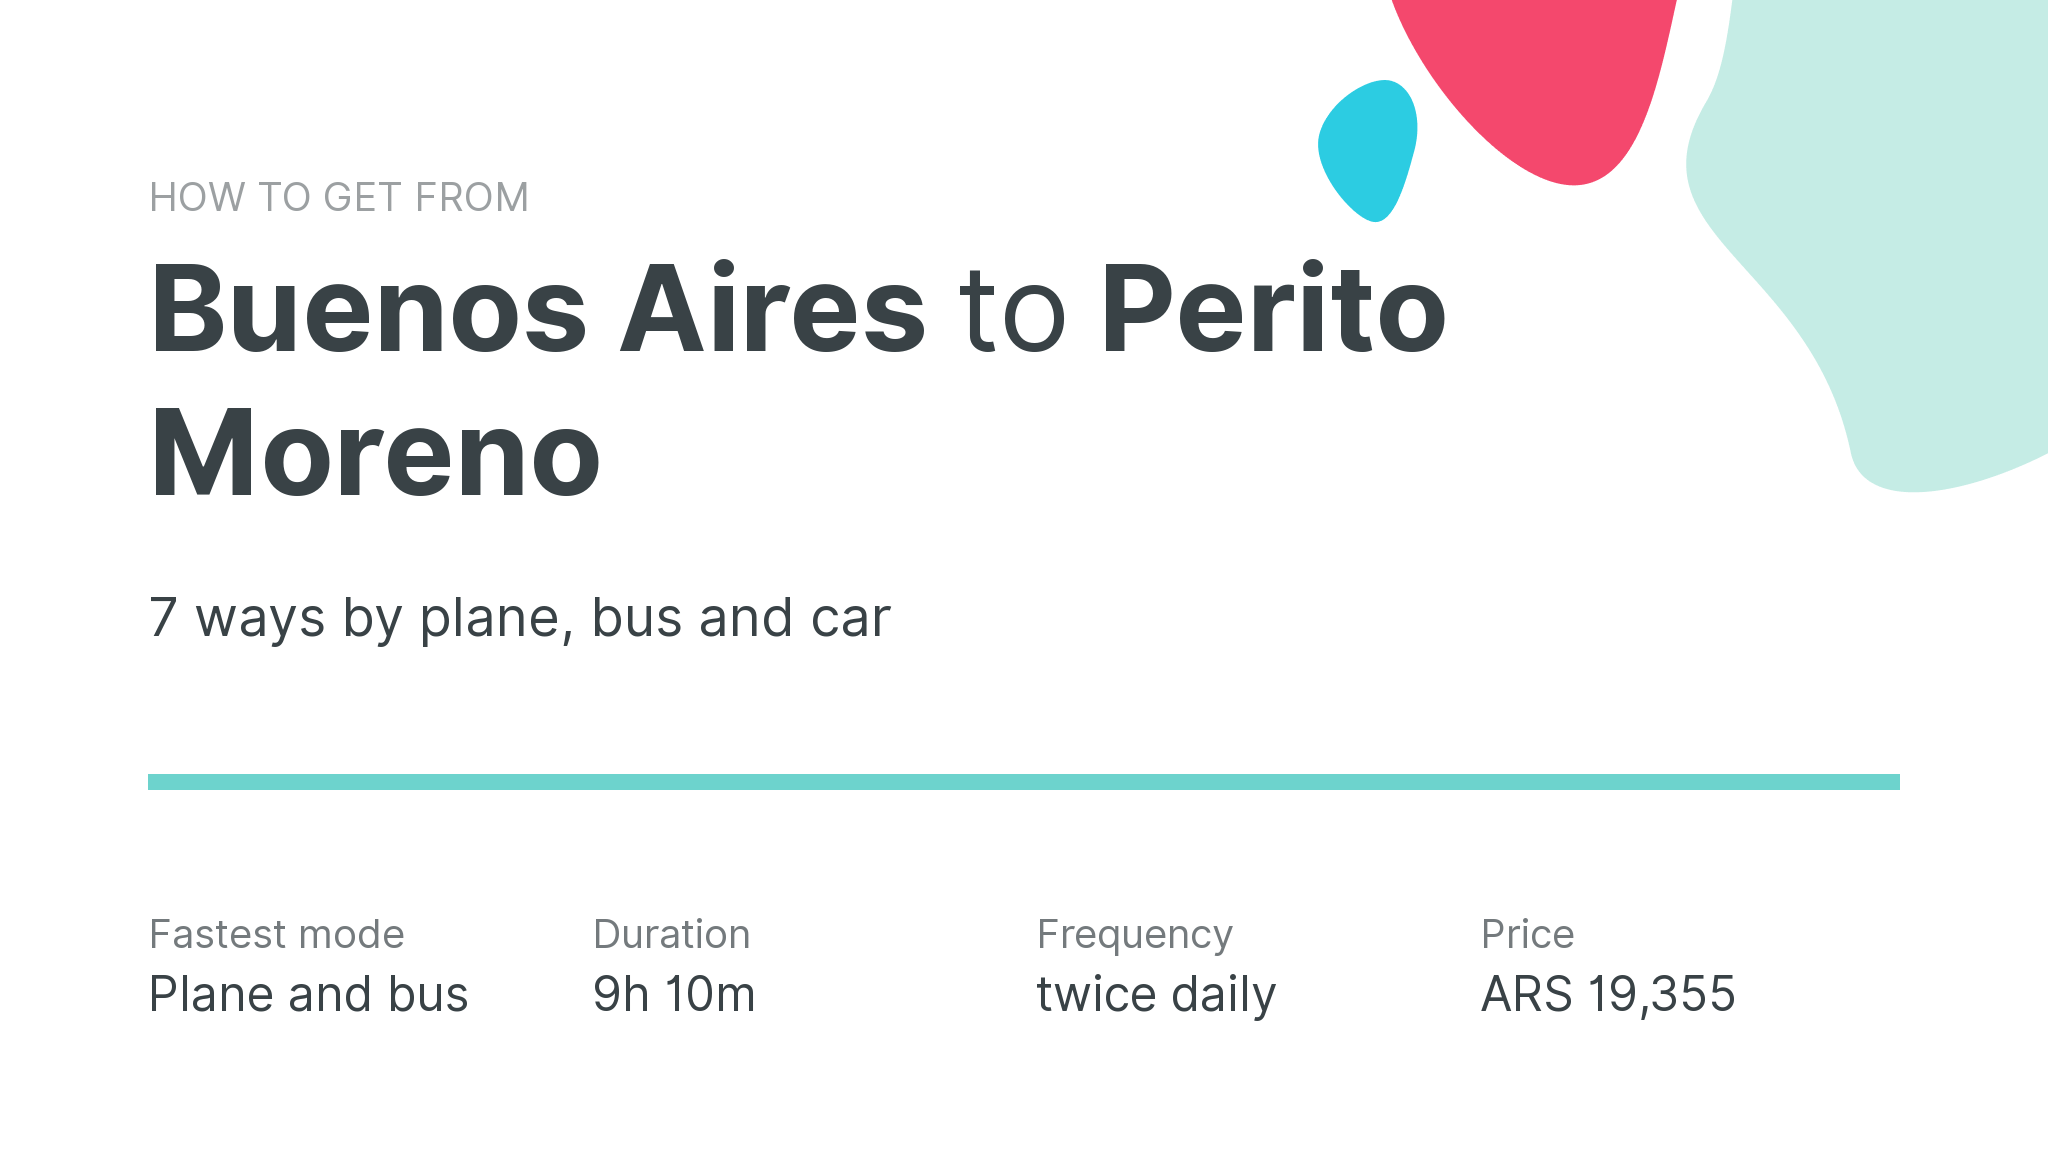 How do I get from Buenos Aires to Perito Moreno